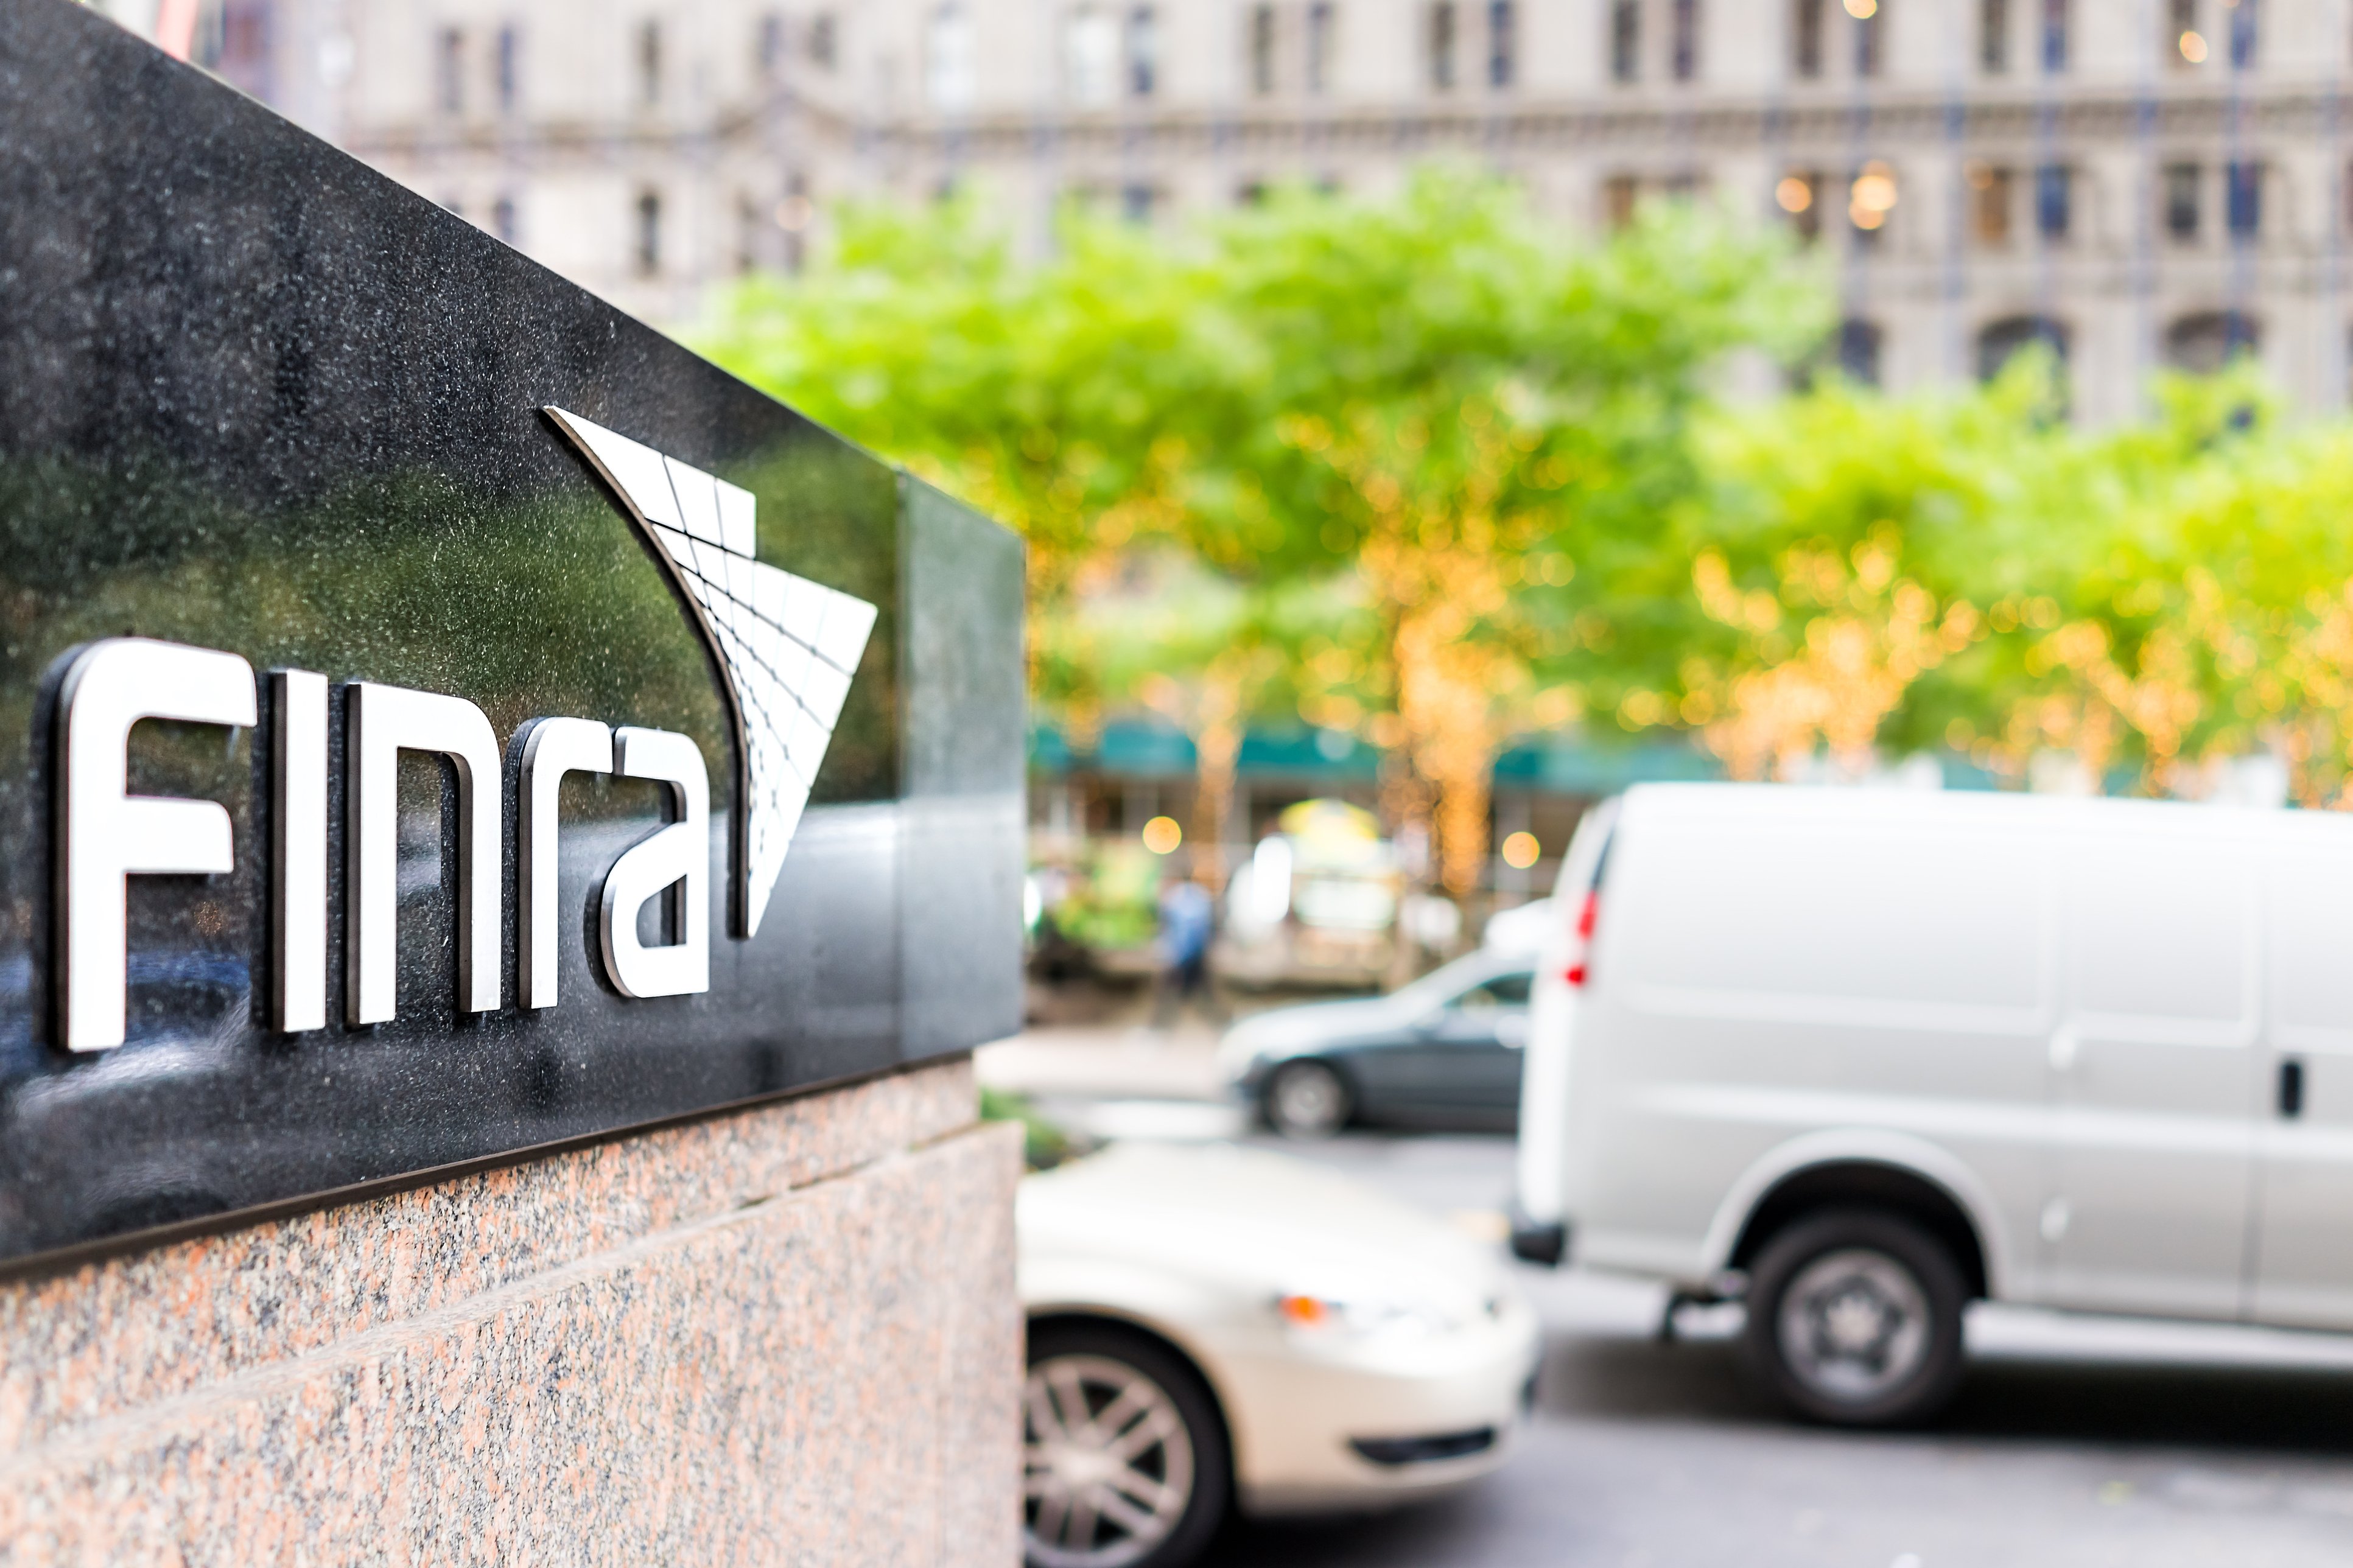 FINRA Building in New York City